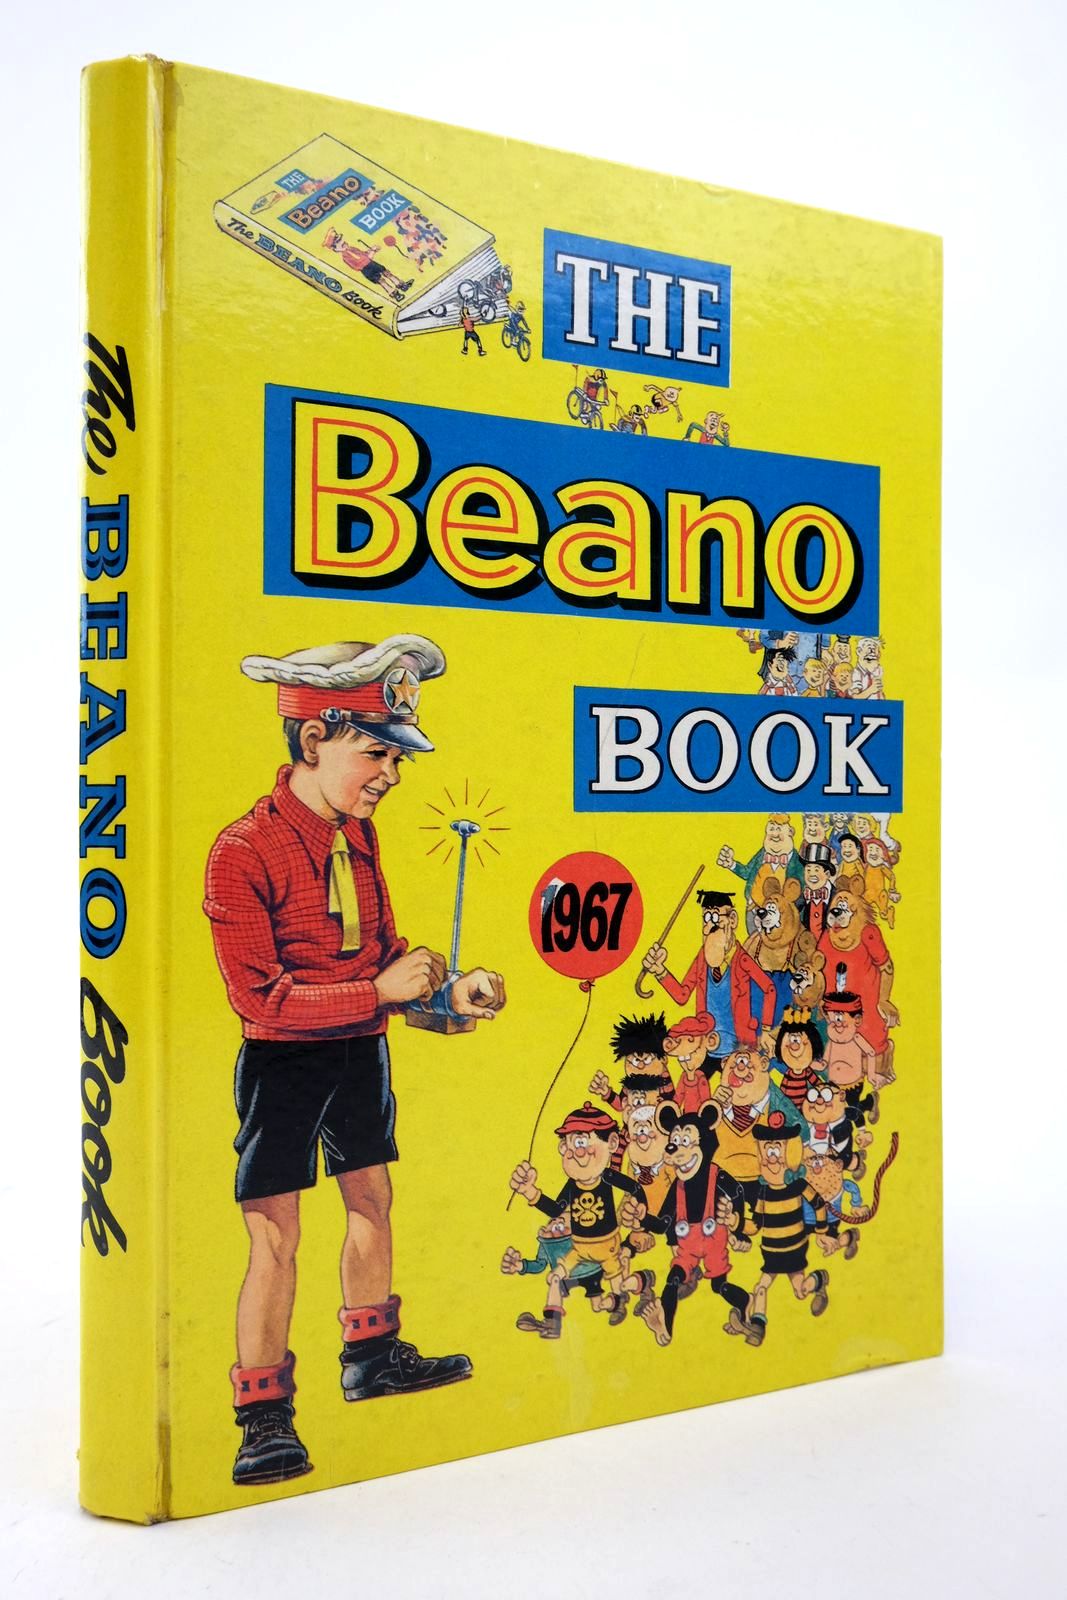 Photo of THE BEANO BOOK 1967 published by D.C. Thomson & Co Ltd. (STOCK CODE: 2140610)  for sale by Stella & Rose's Books